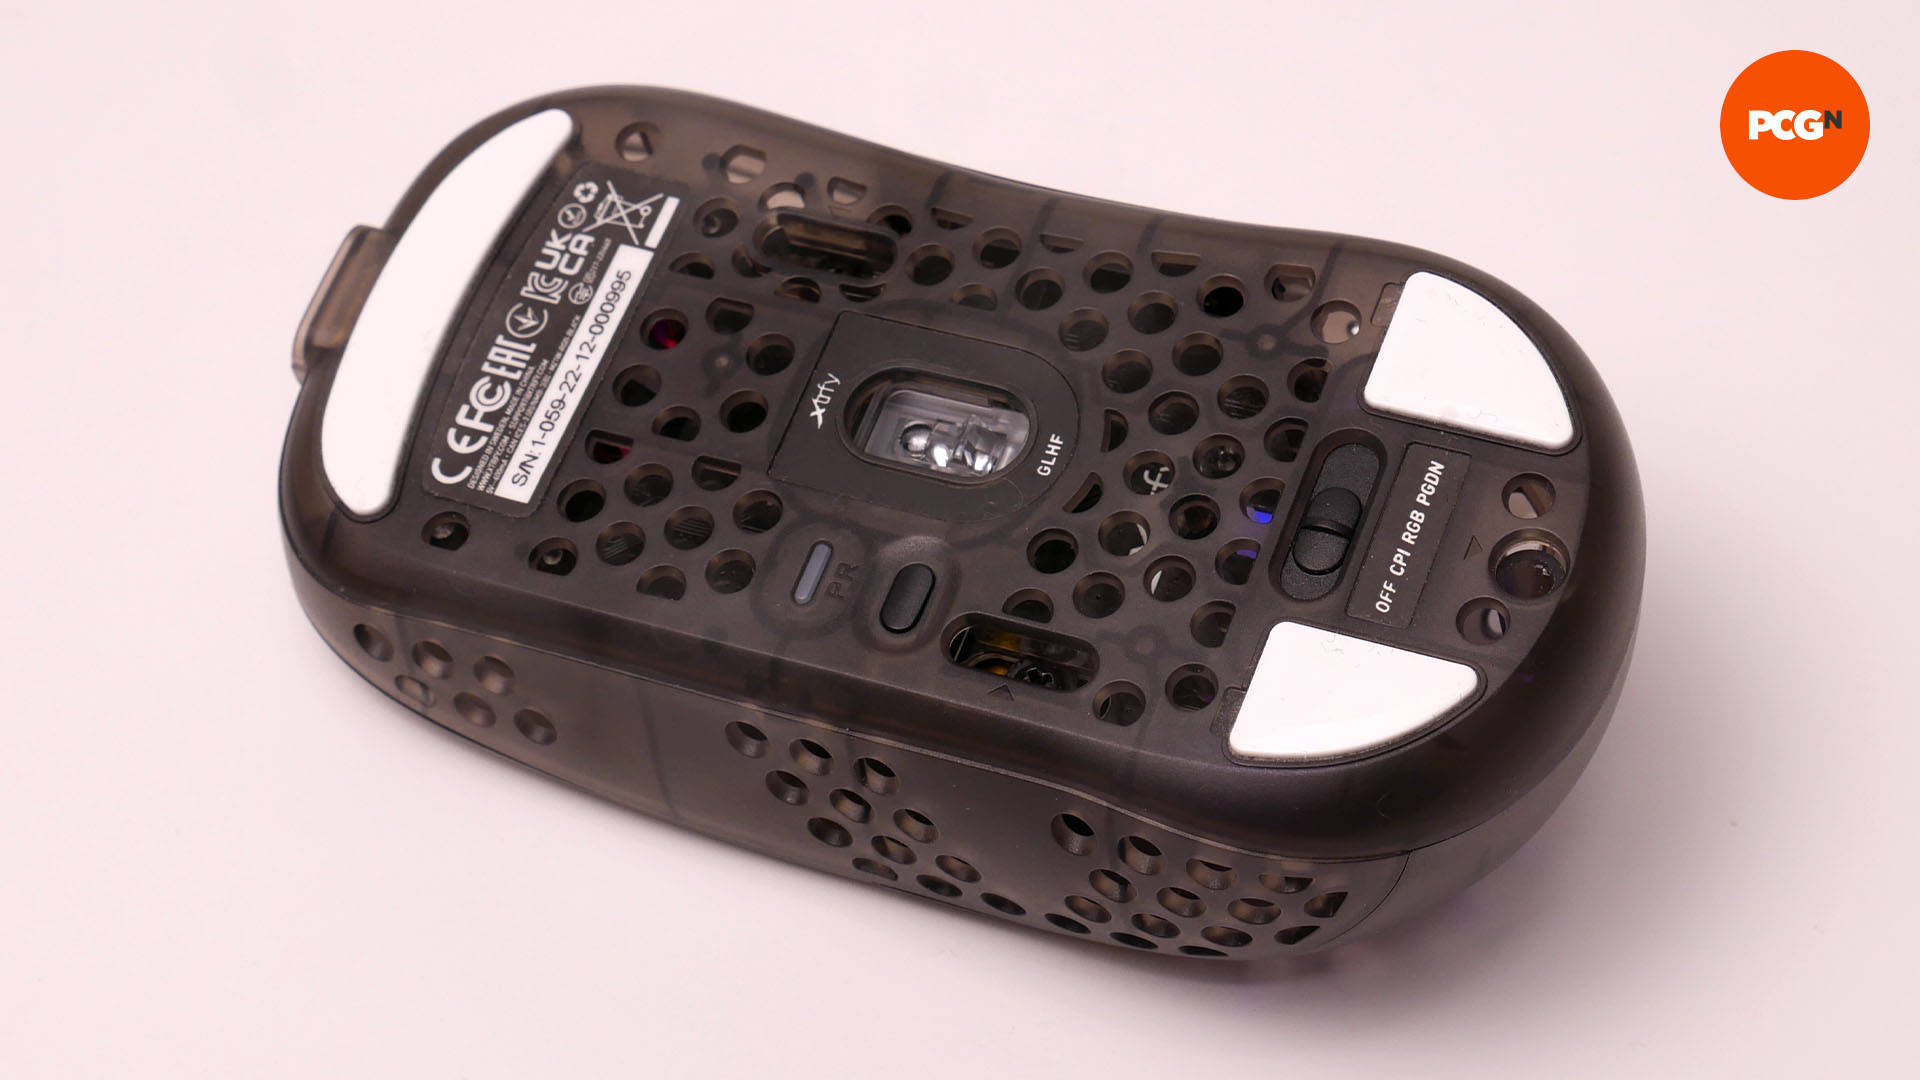 The underside of the Cherry XTRFY MZ1 wireless mouse